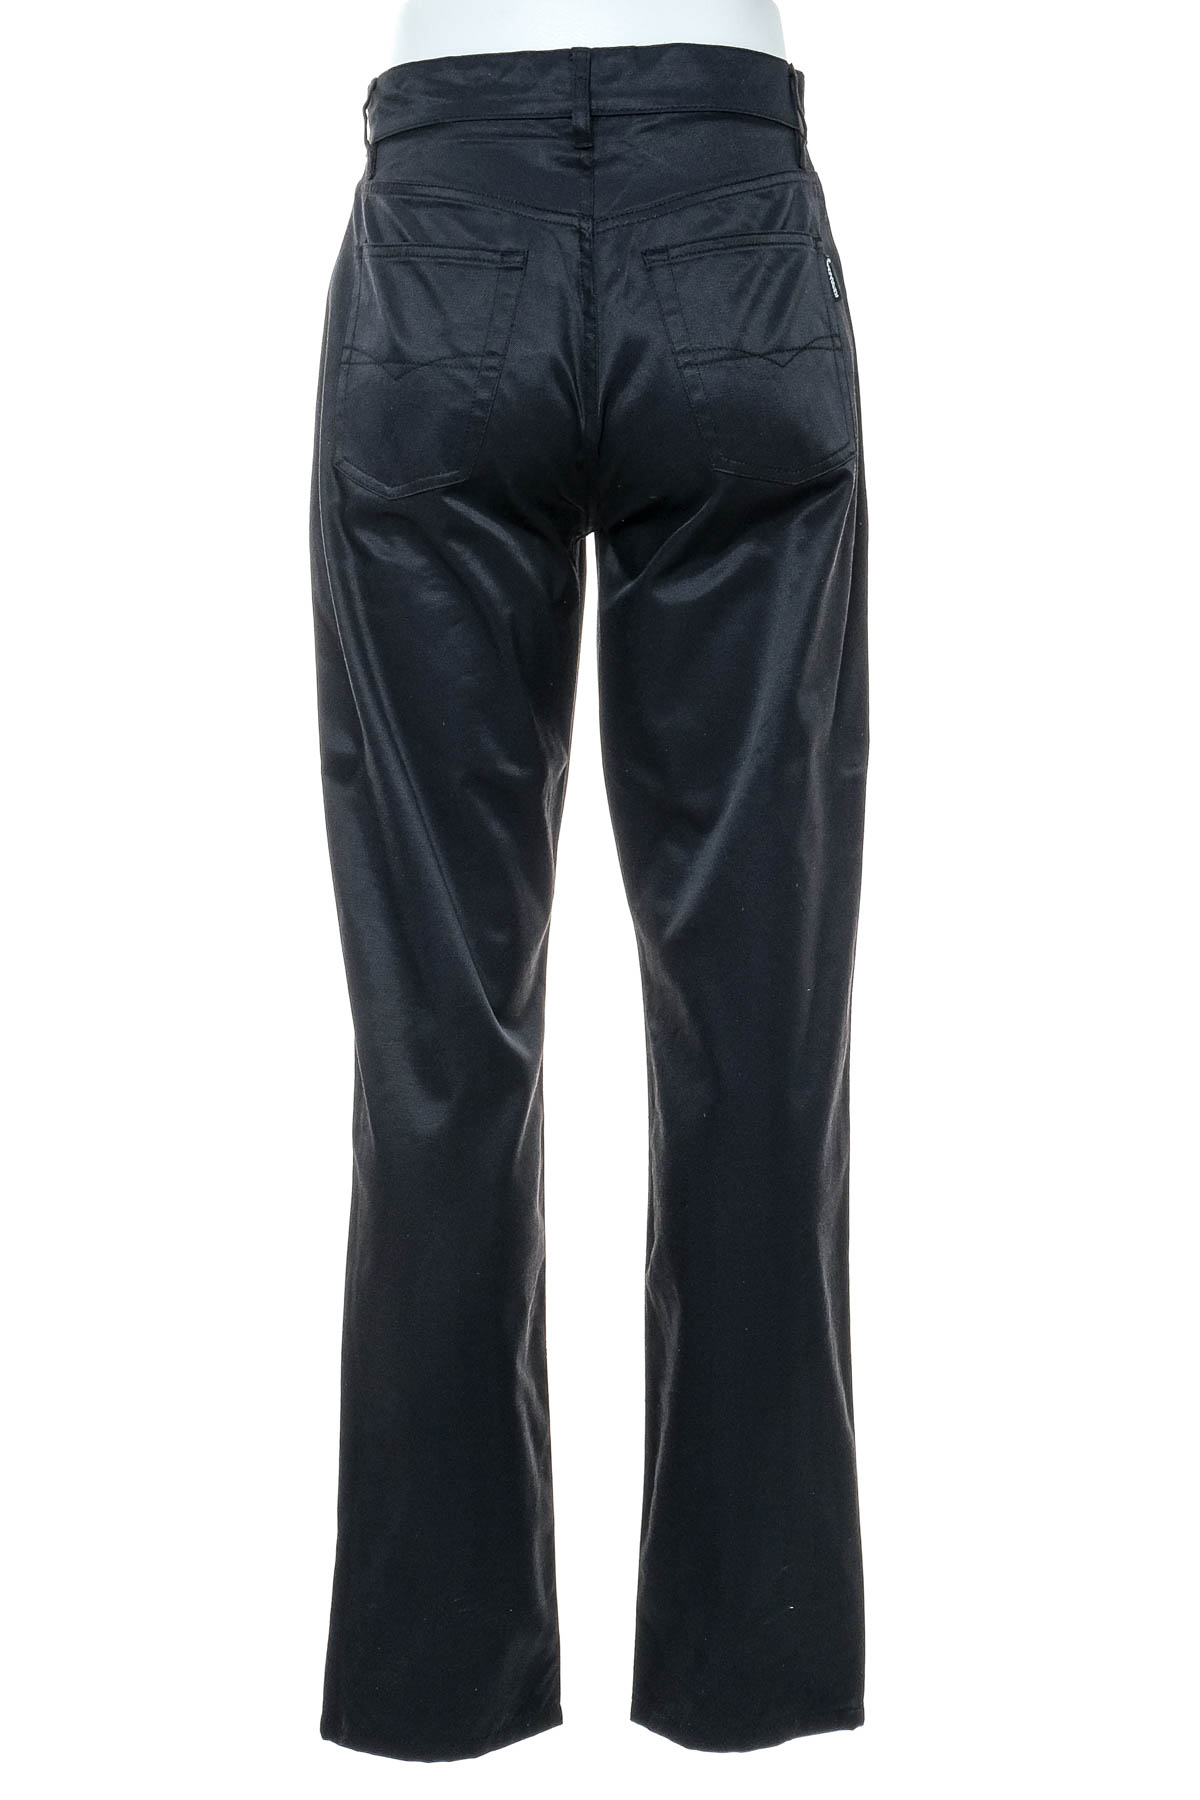 Men's trousers - Jeanagers - 1